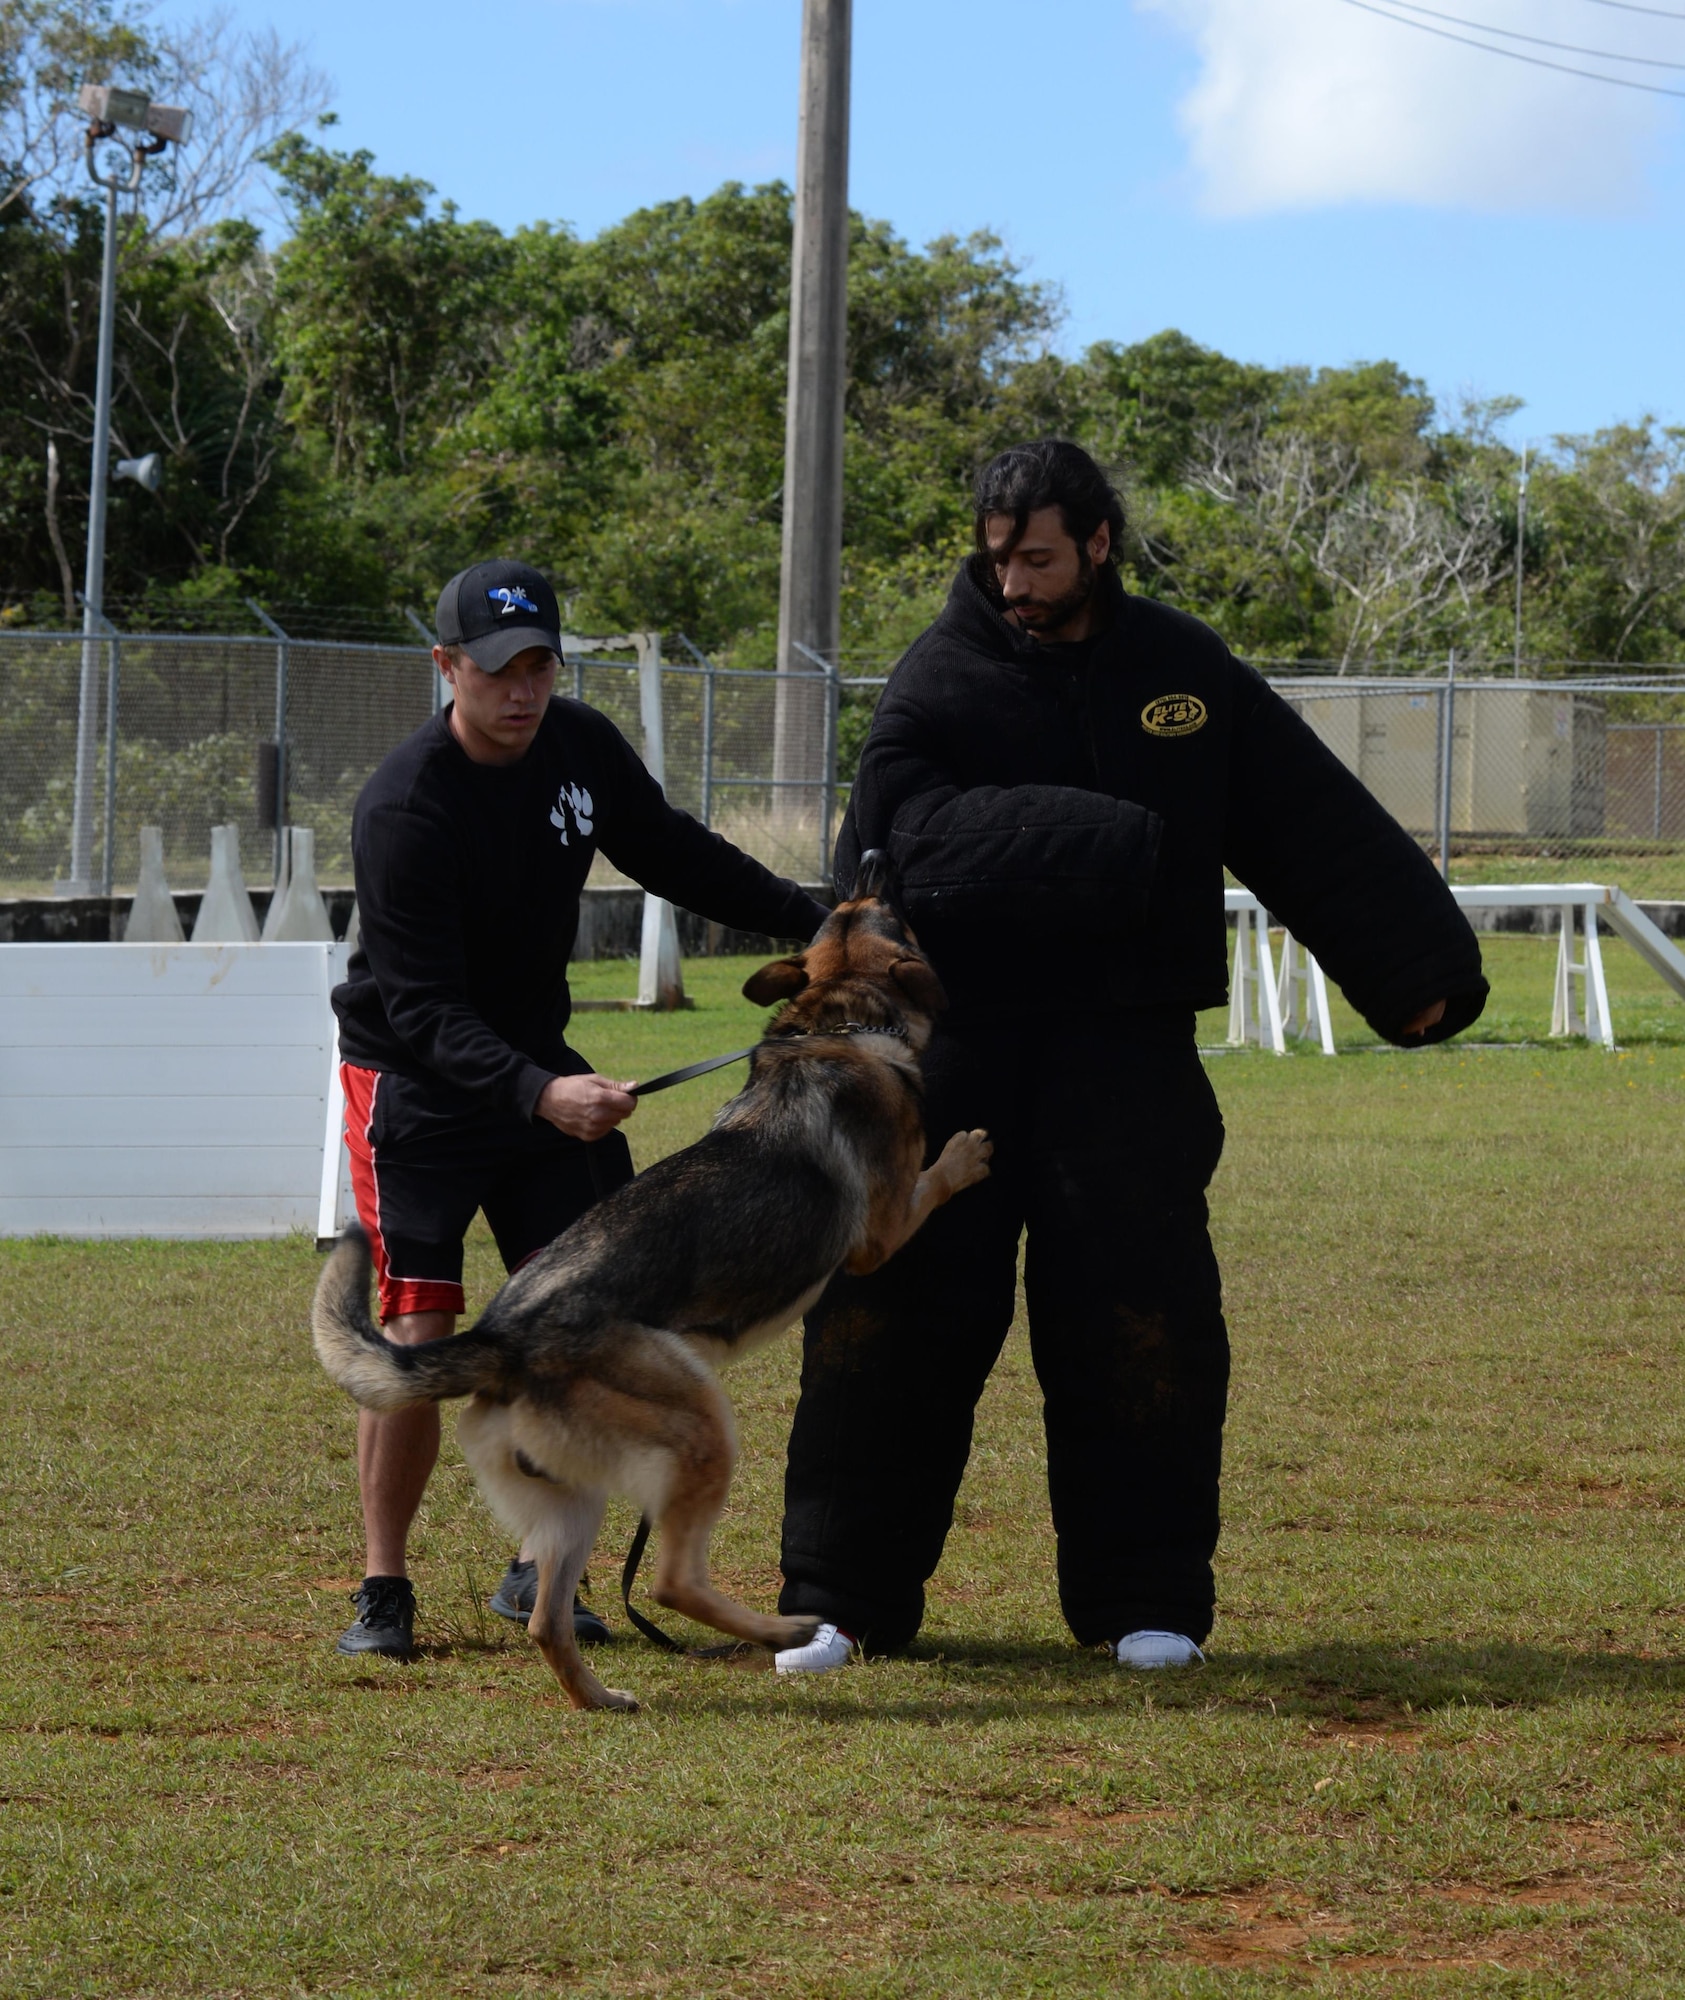 Nasri, the lead singer from the Canadian reggae fusion band Magic!, engages with a military working dog during a K-9 demonstration Jan. 14, 2016, at Andersen Air Force Base, Guam. Members from the band toured Andersen AFB which included visiting the flightline, interacting with the 23rd Expeditionary Bomb Squadron and participating in training with military working dogs. (U.S. Air Force photo/Staff Sgt. Katrina Brisbin)